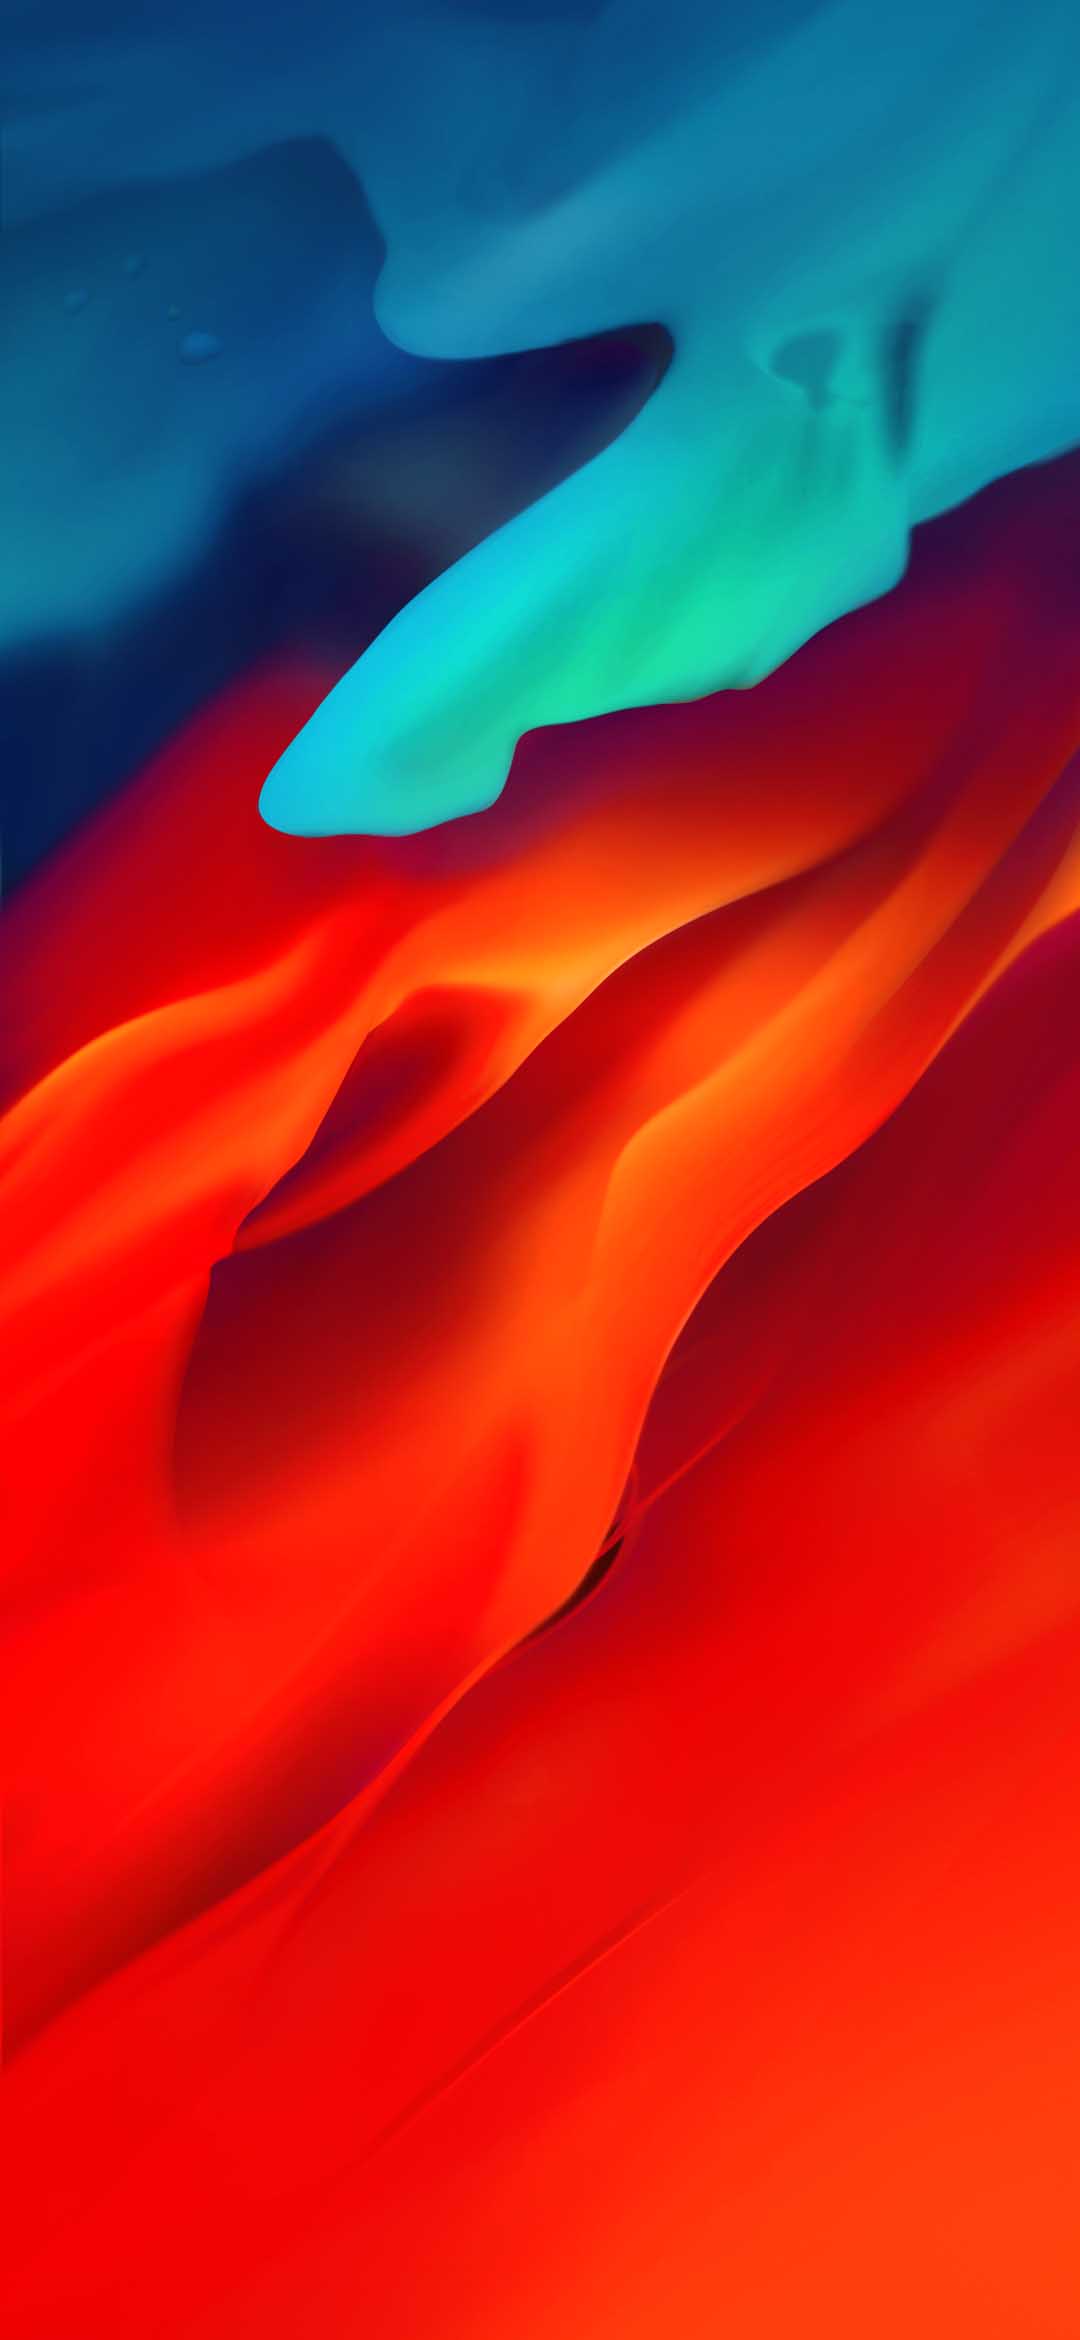 The Lenovo Z6 Pro Wallpaper Pack, Keep In Mind Though Z6